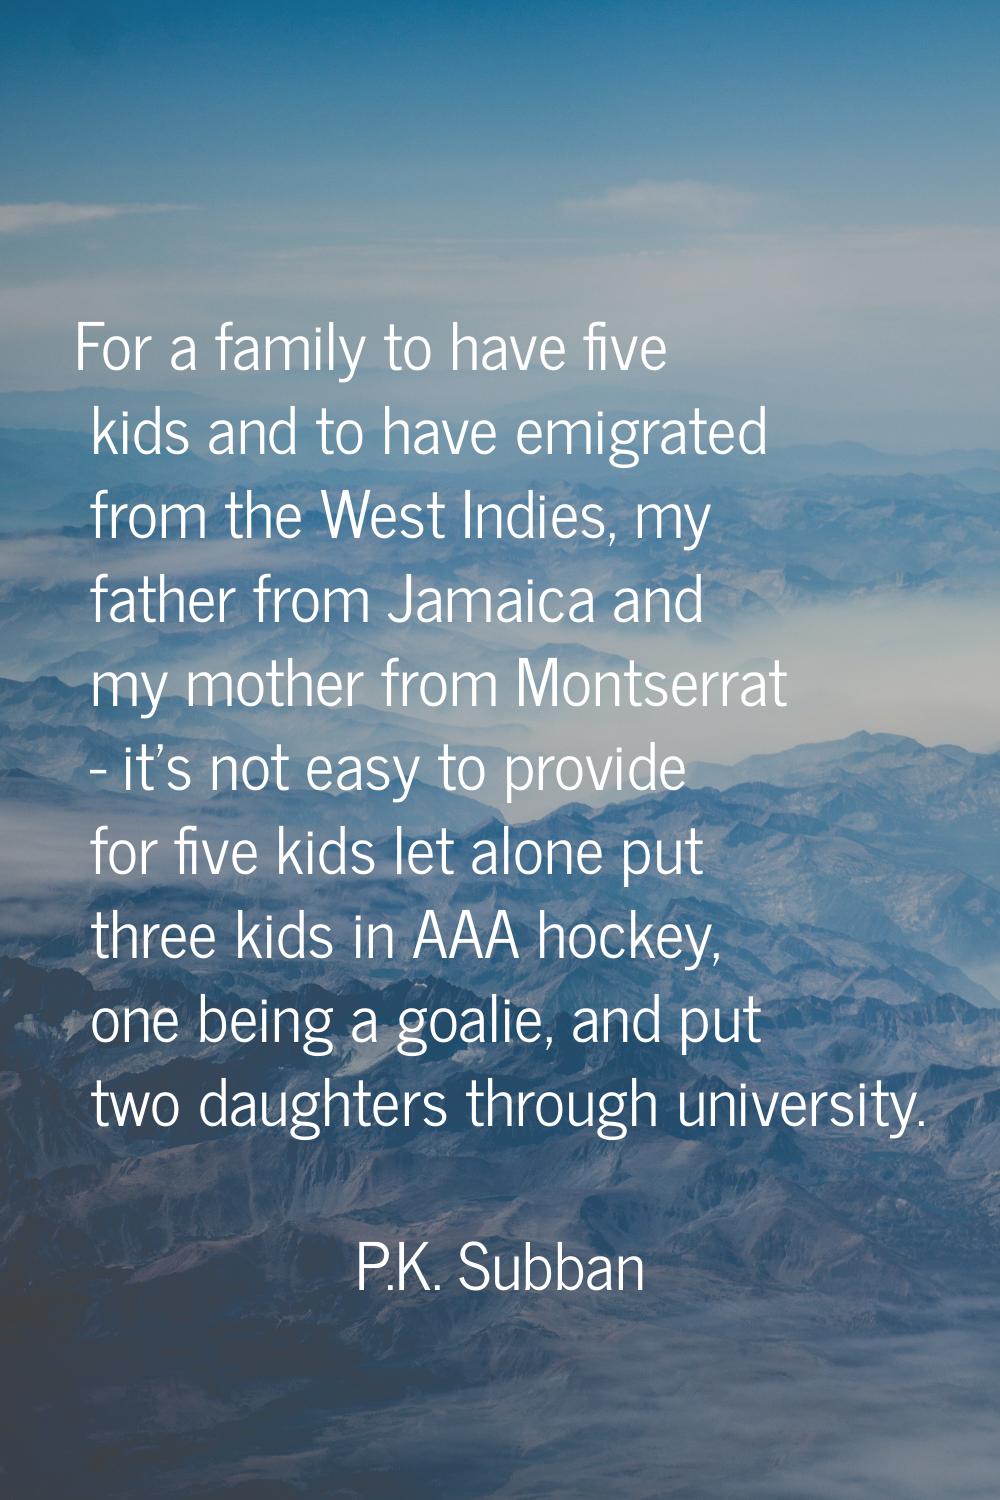 For a family to have five kids and to have emigrated from the West Indies, my father from Jamaica a